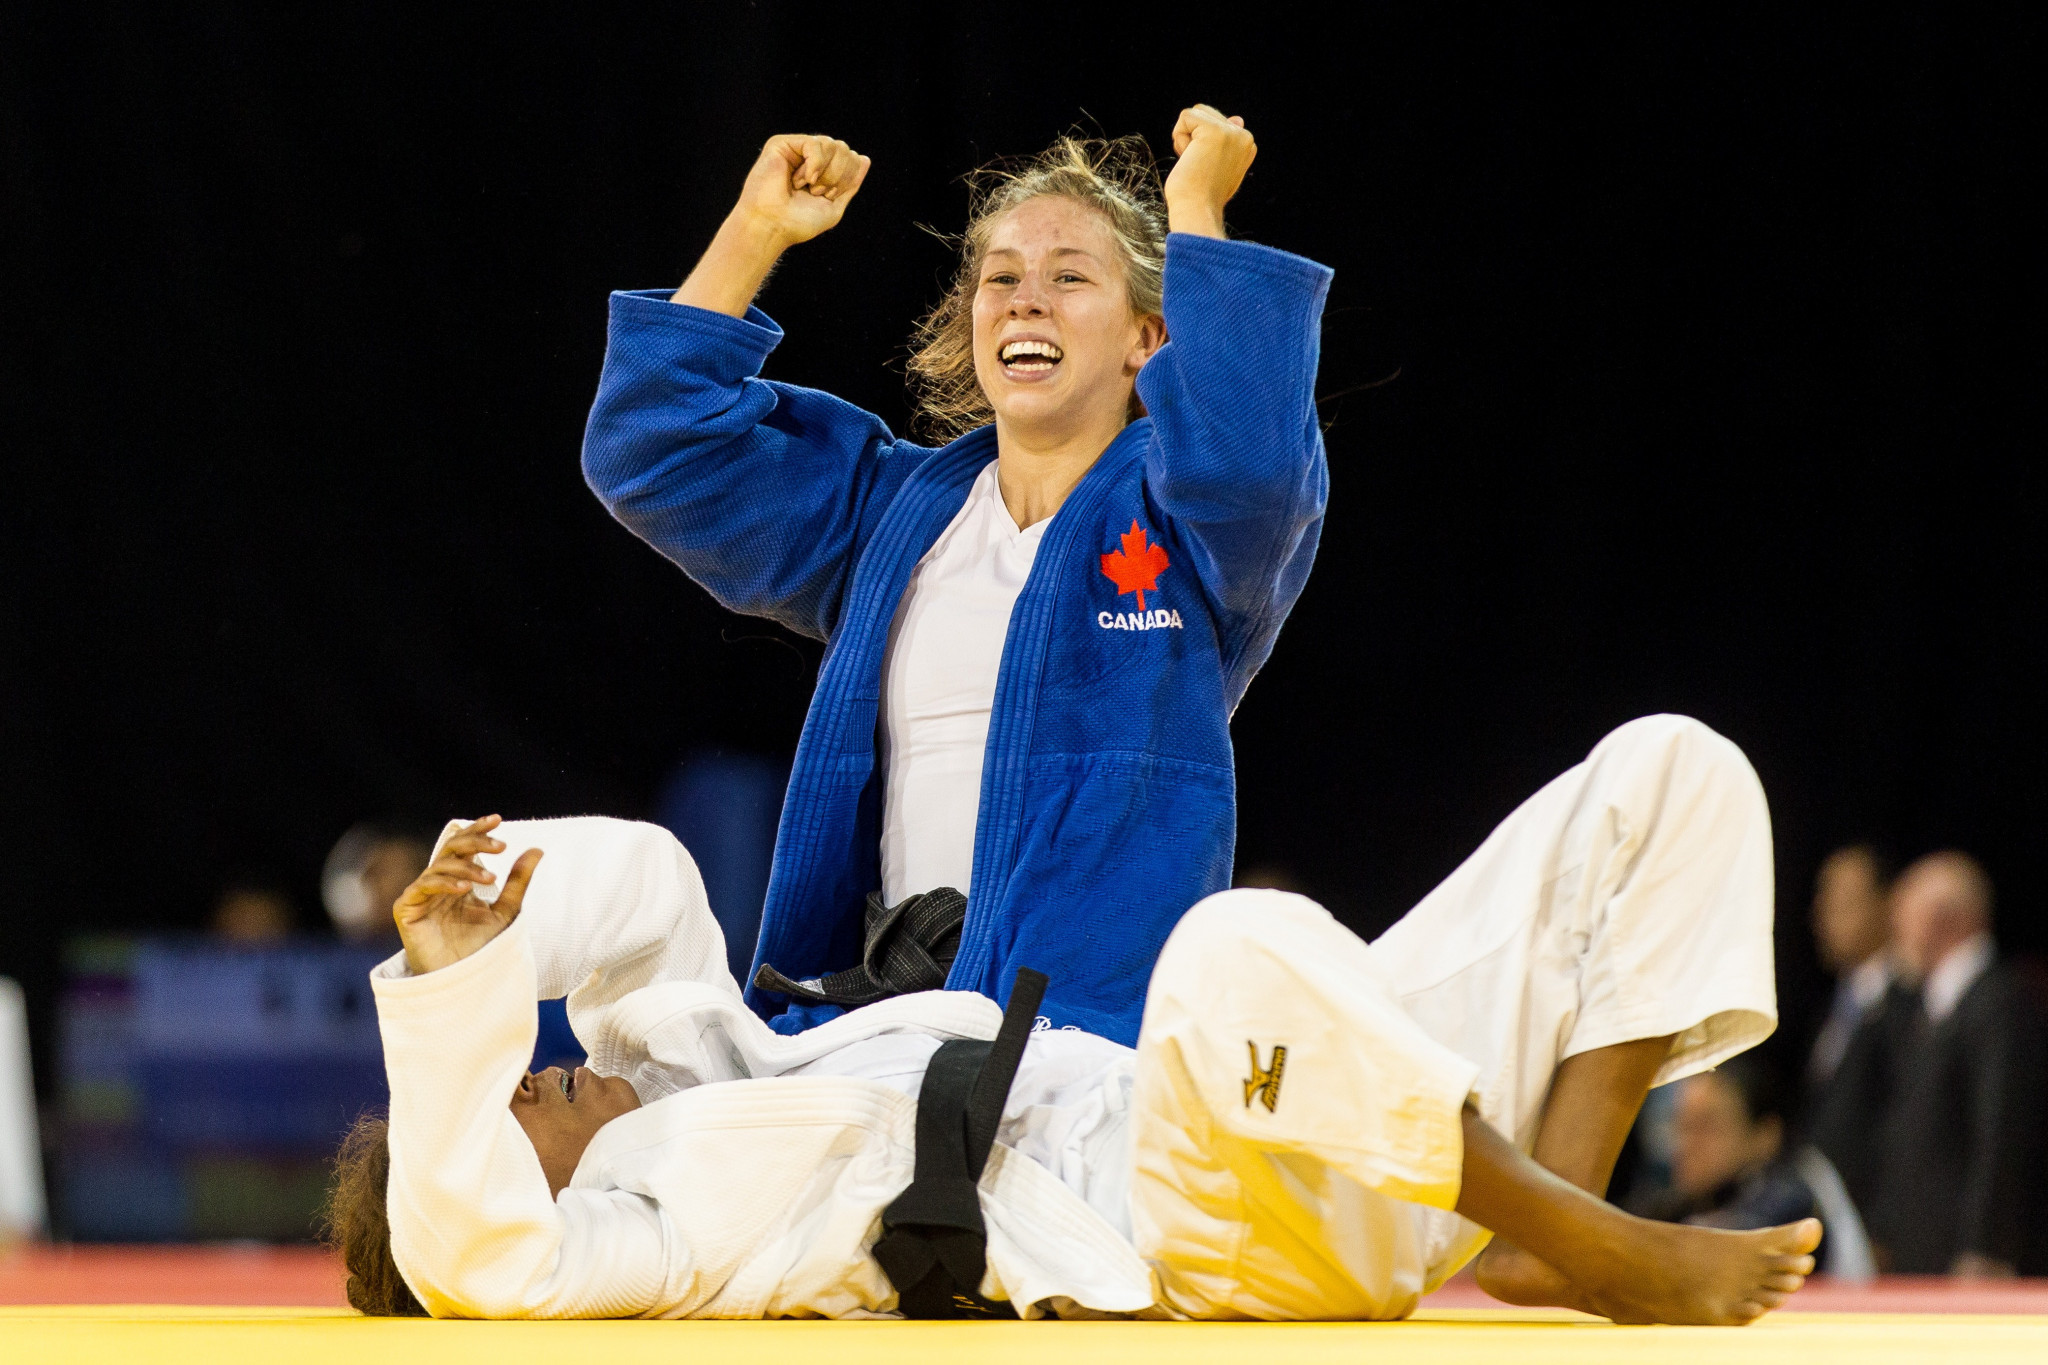 Canadian judokas return to training while living in "bubble"